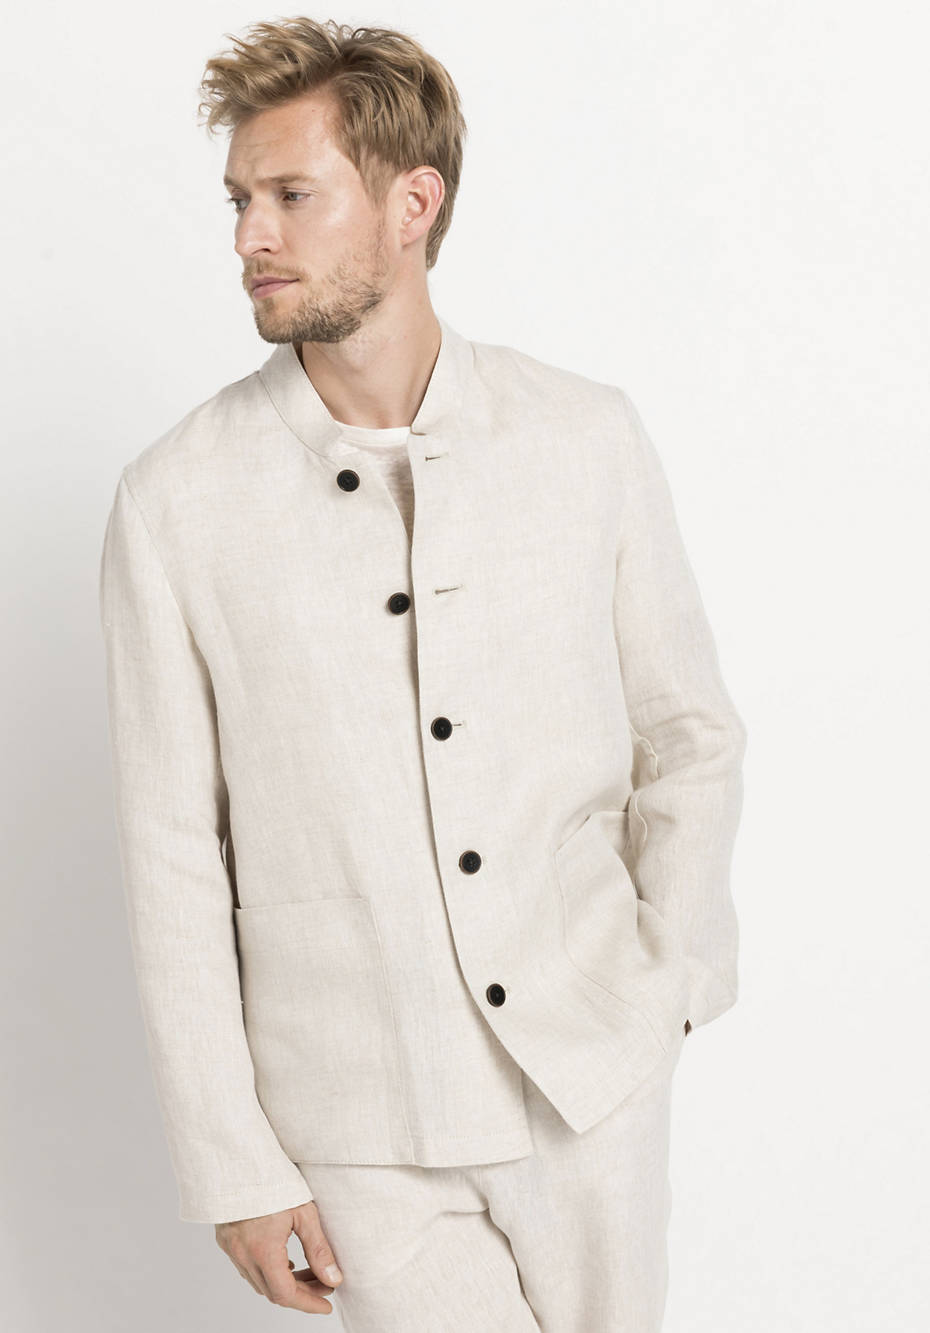 Limited by nature shirt jacket made from pure Hessen linen